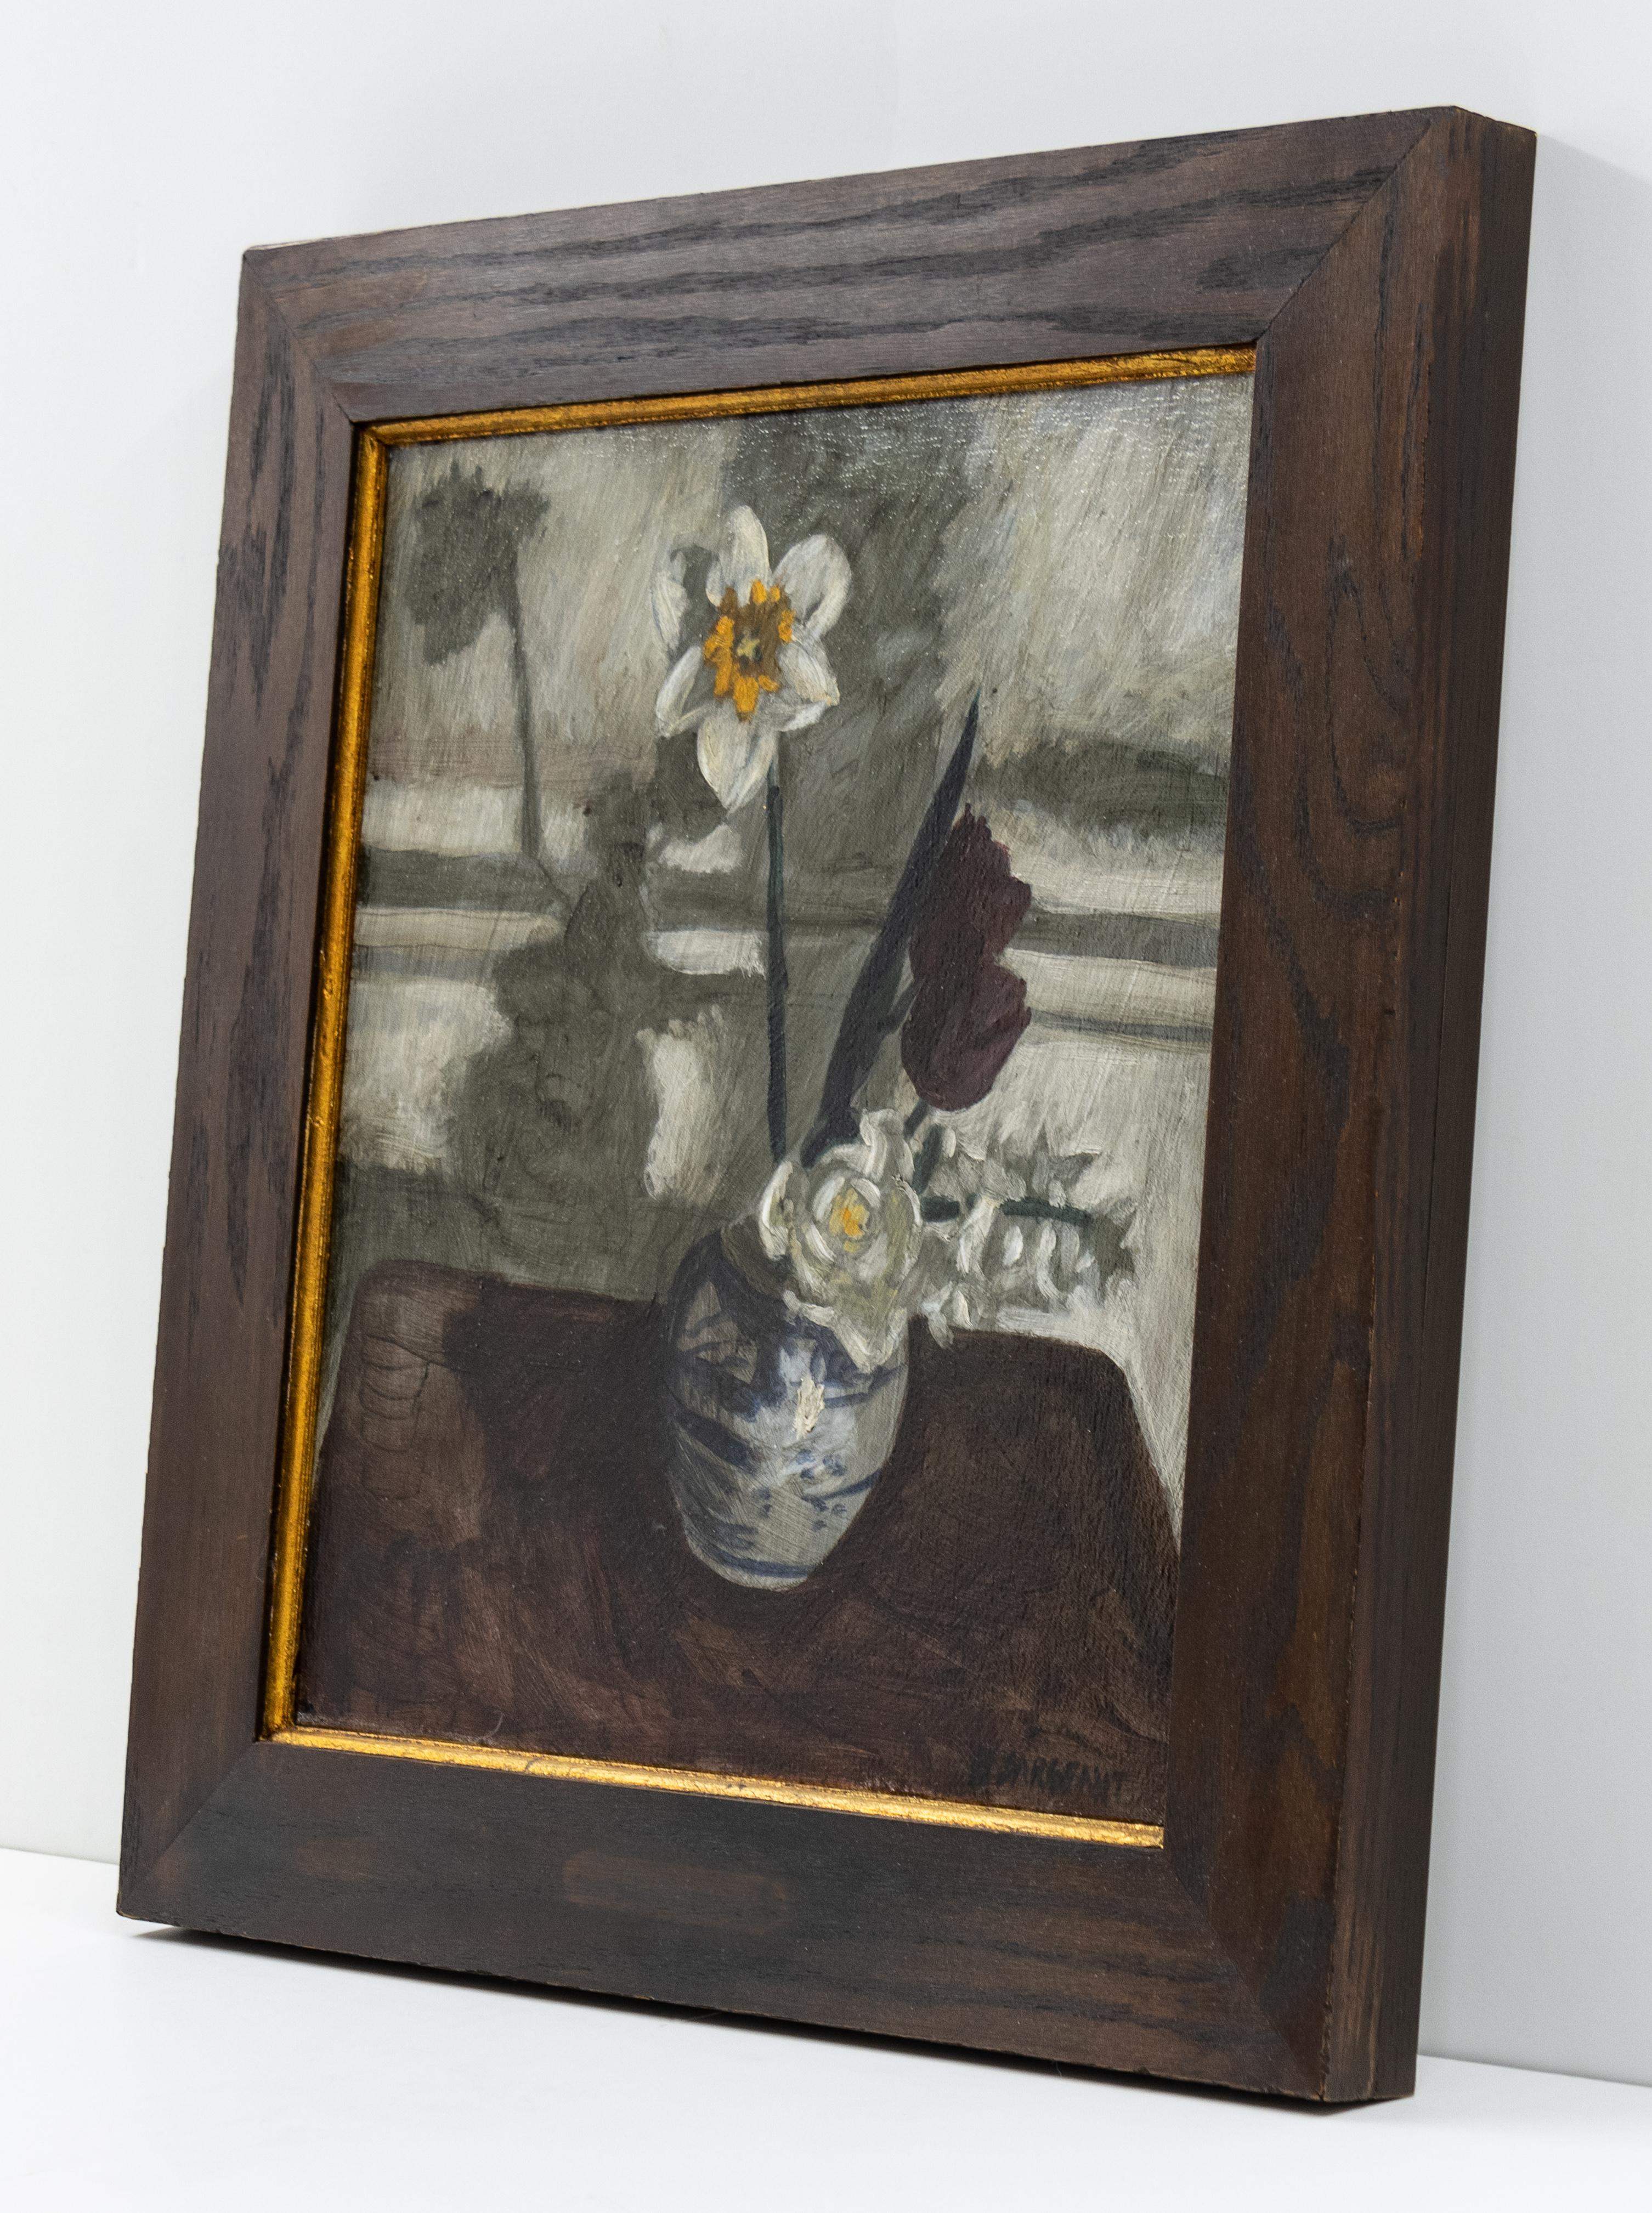  [Bruce Sargeant (1898-1938)] Flower Still Life - Contemporary Painting by Mark Beard